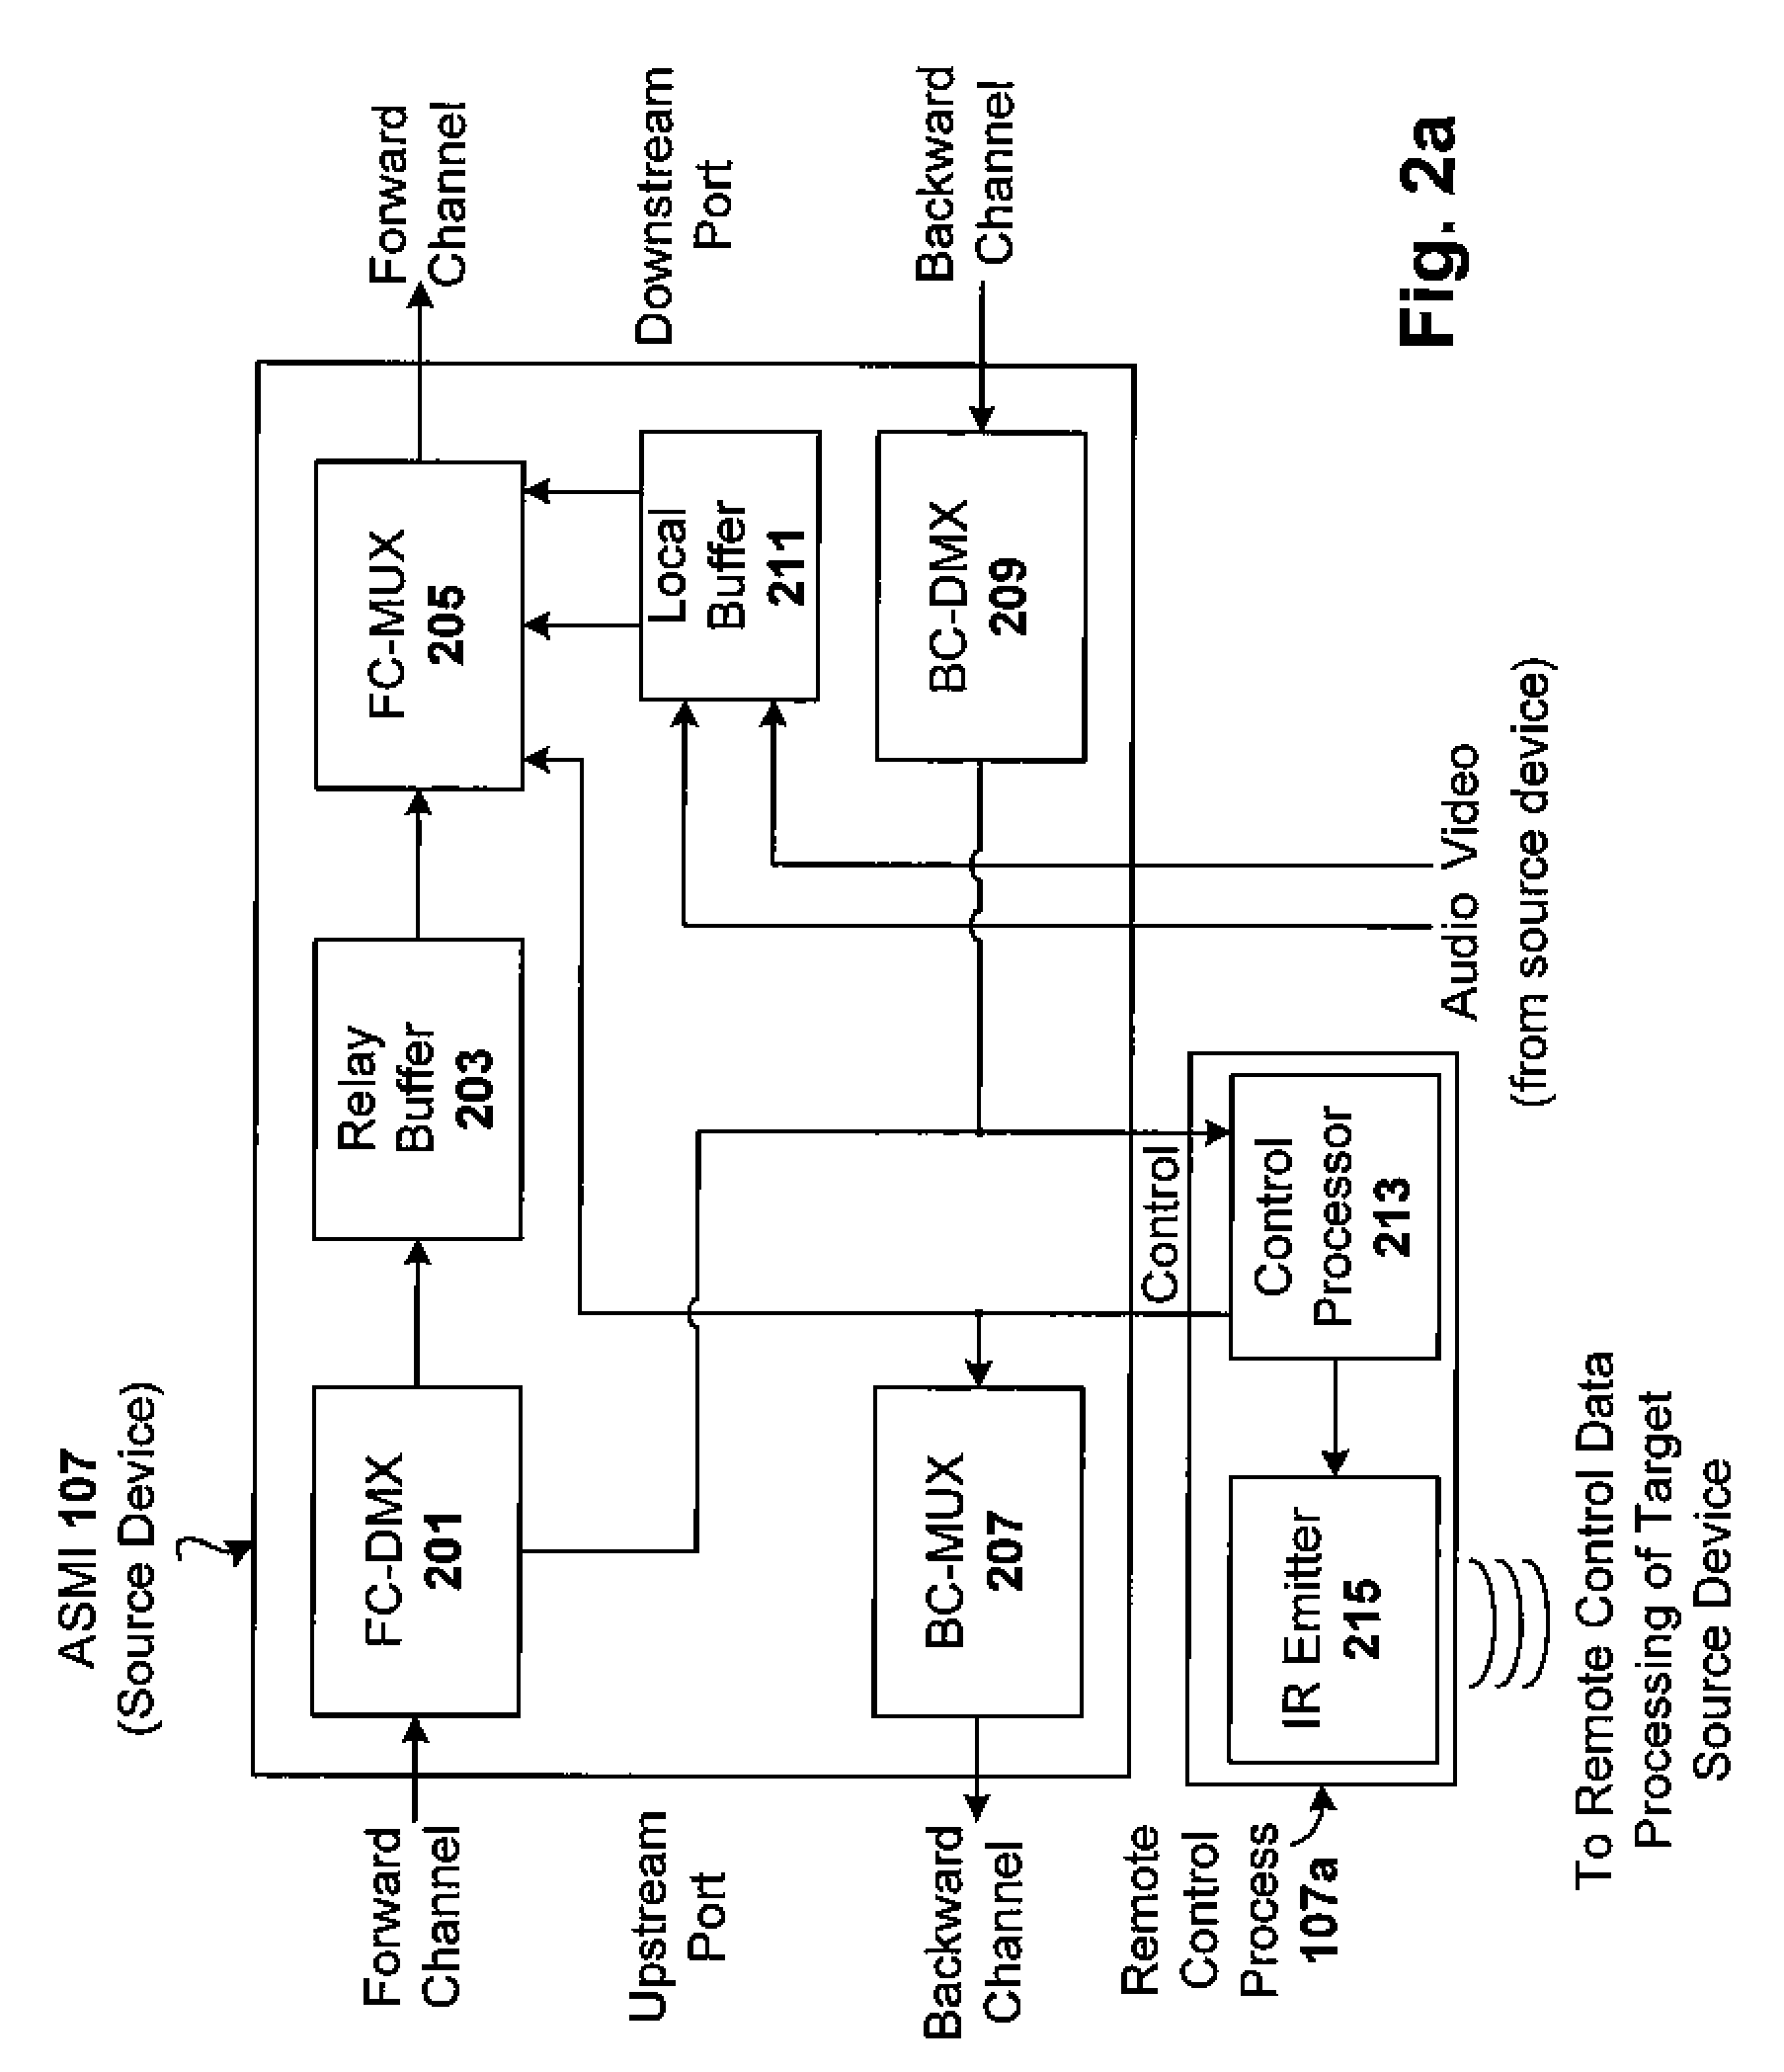 Integrated remote control signaling